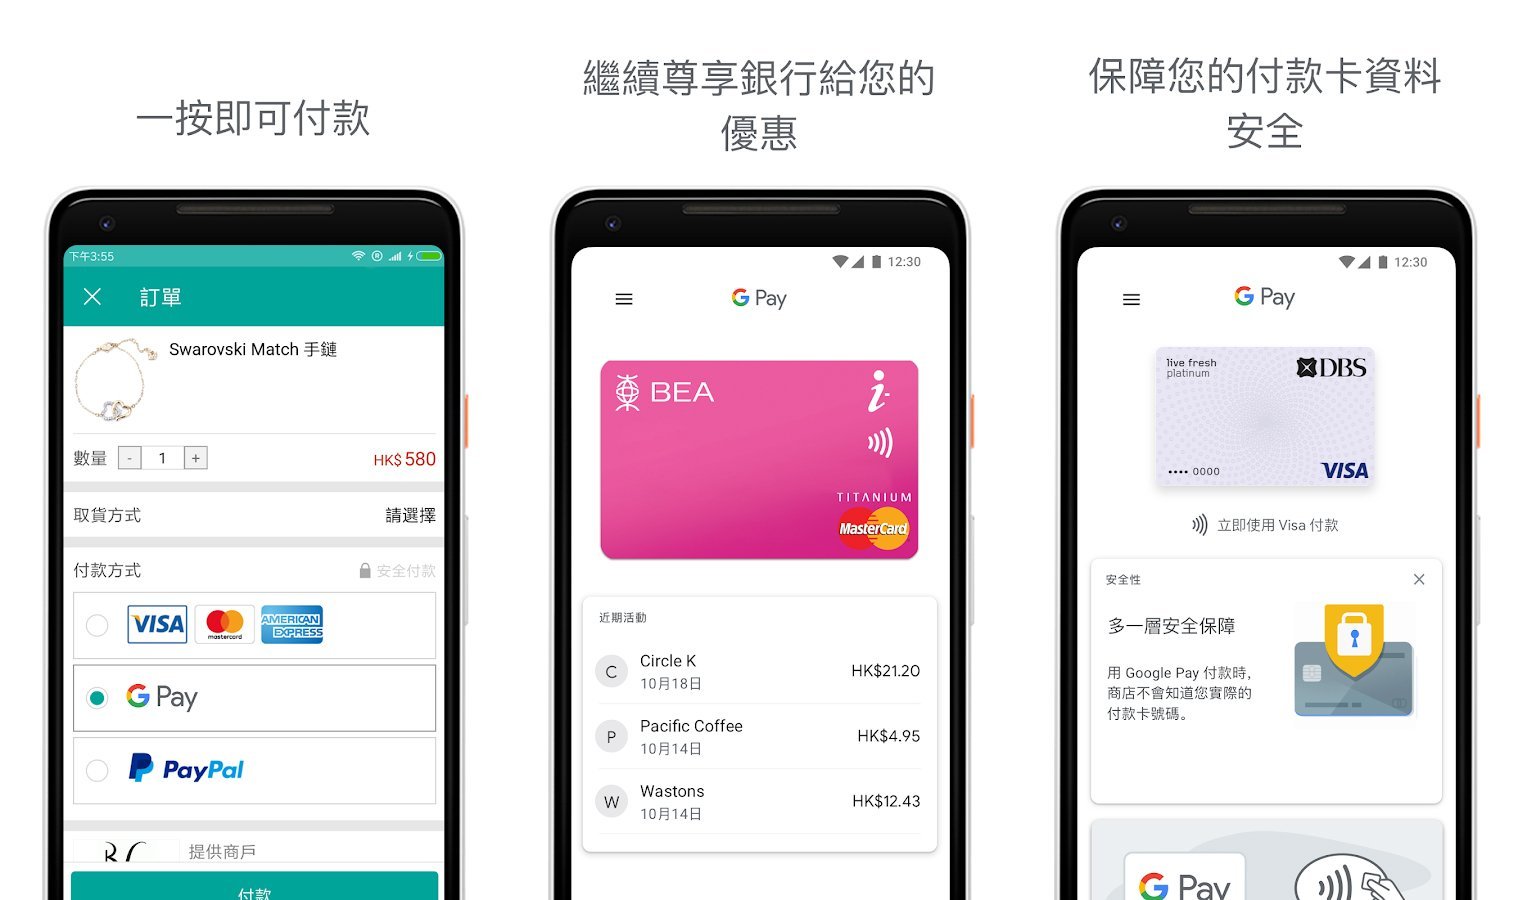 google pay is here 03